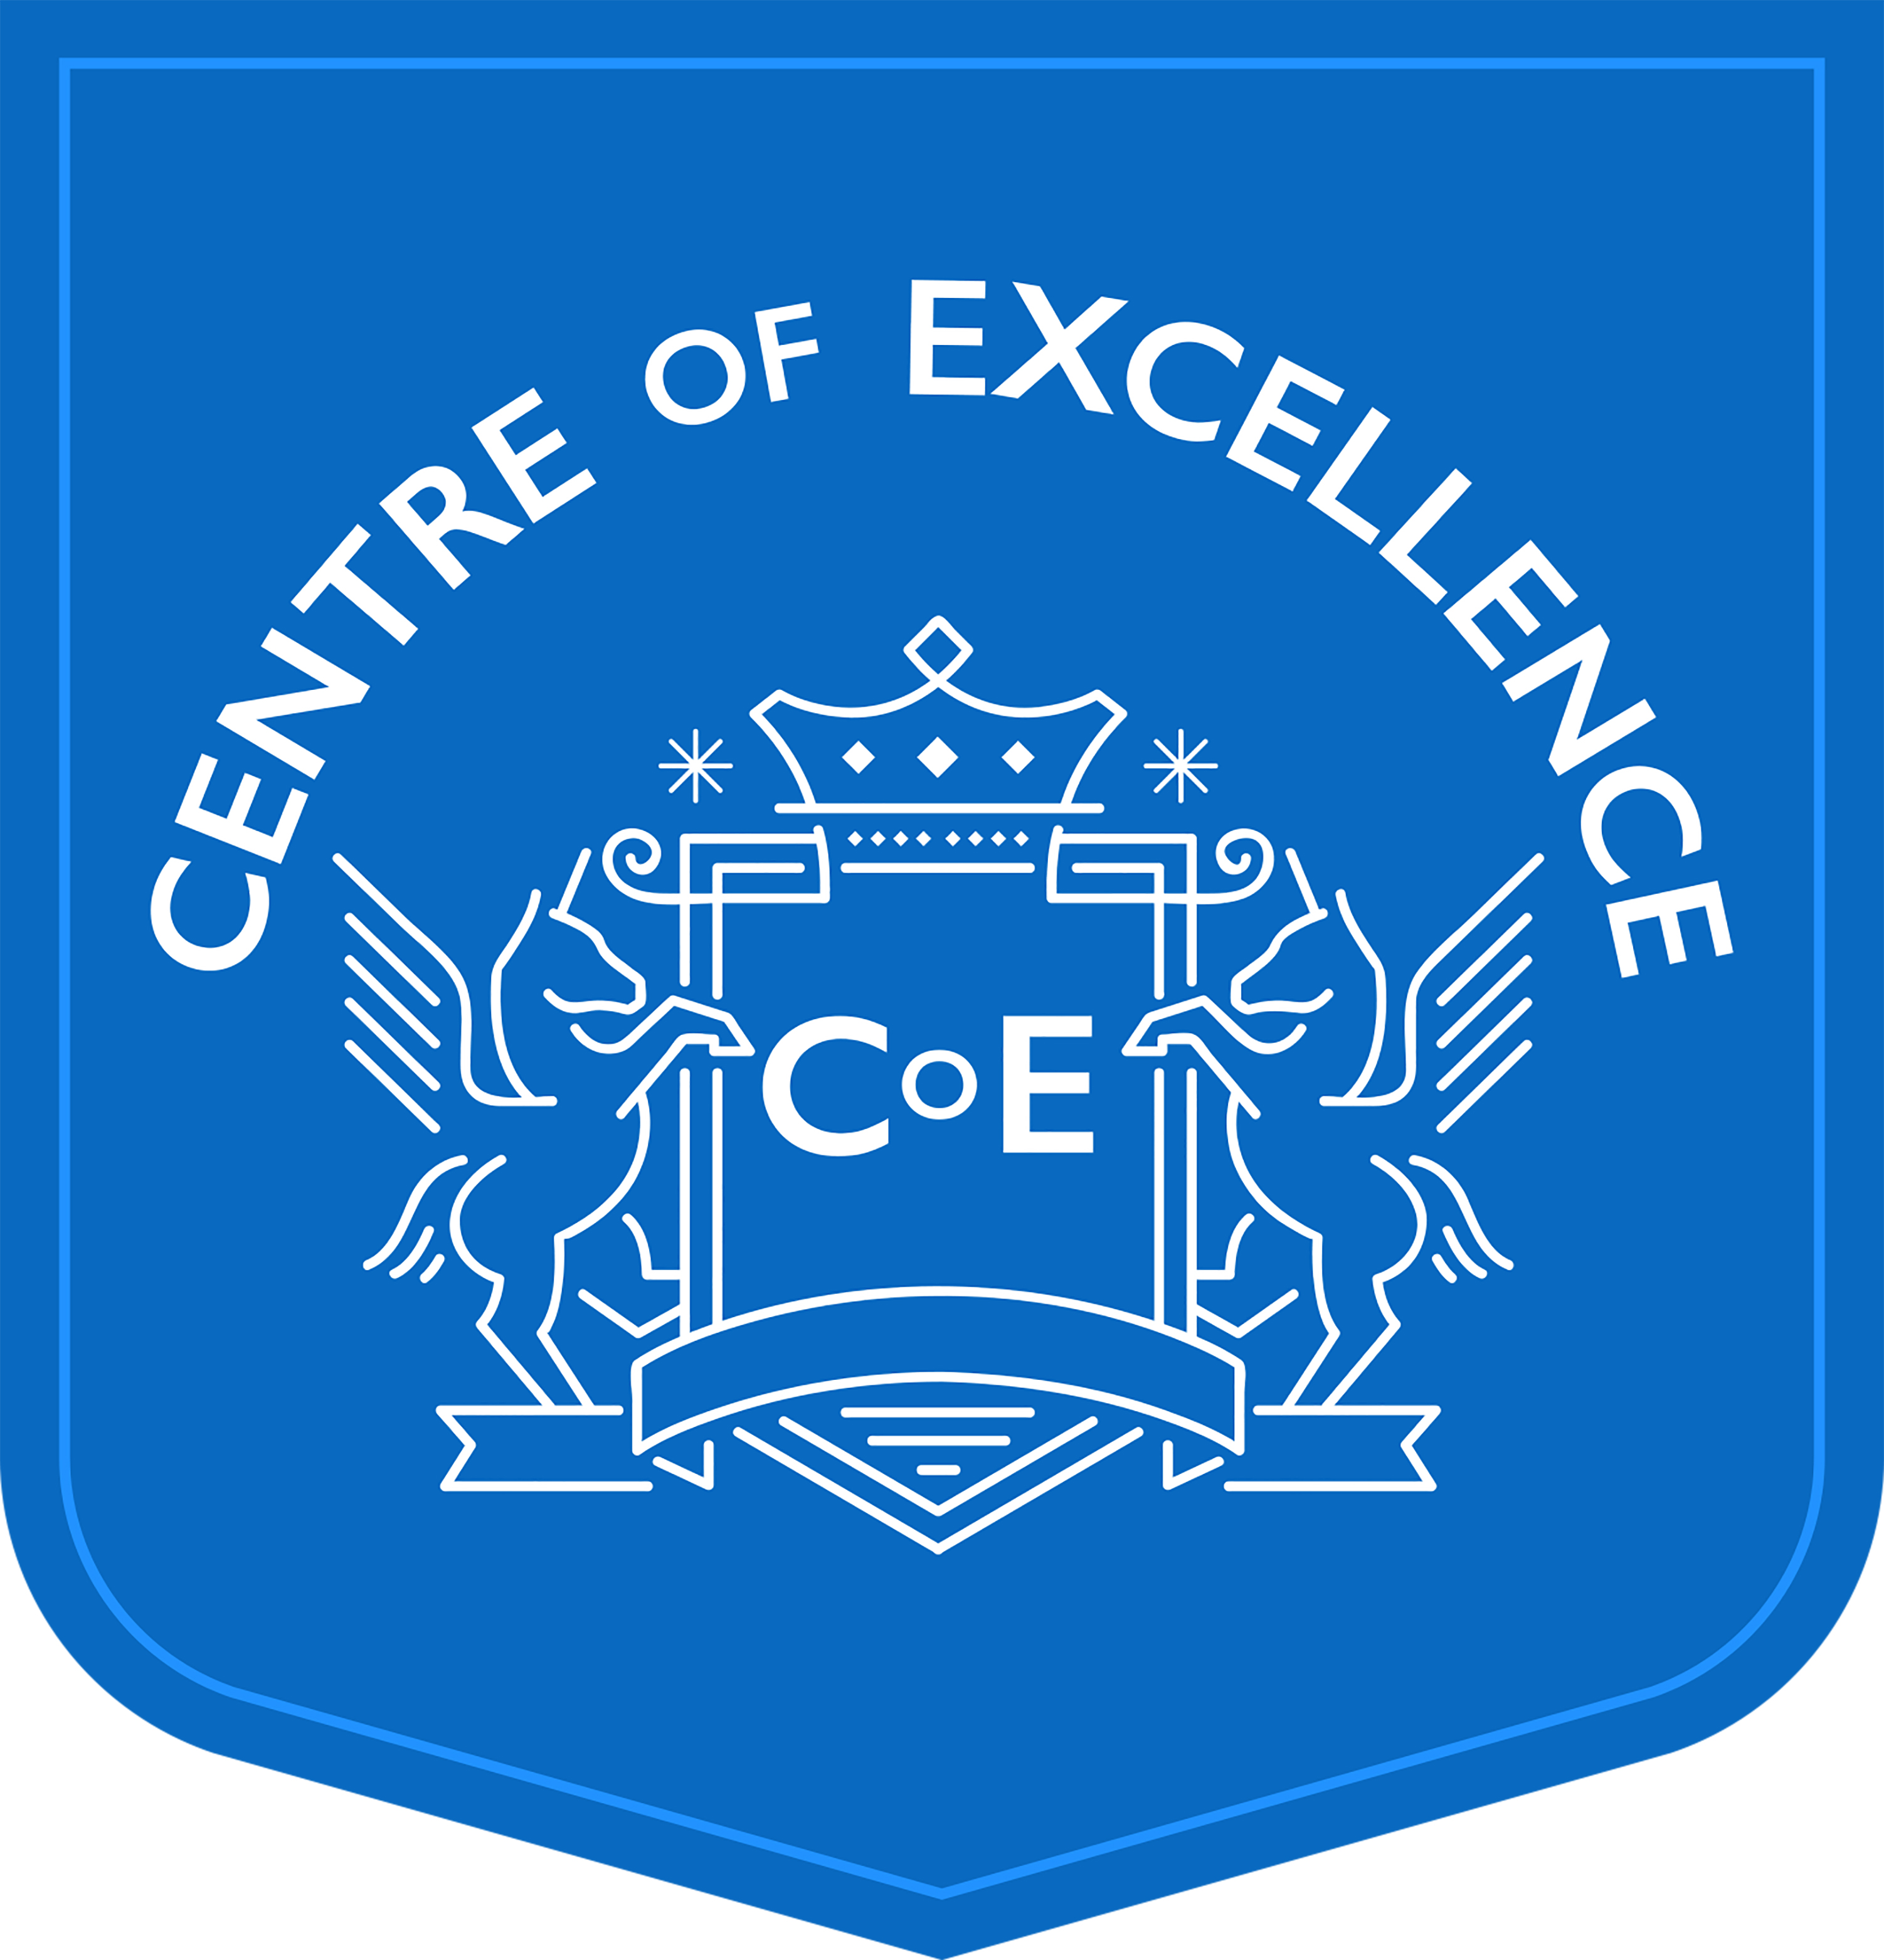 Online Institute - Centre Of Excellence Logo